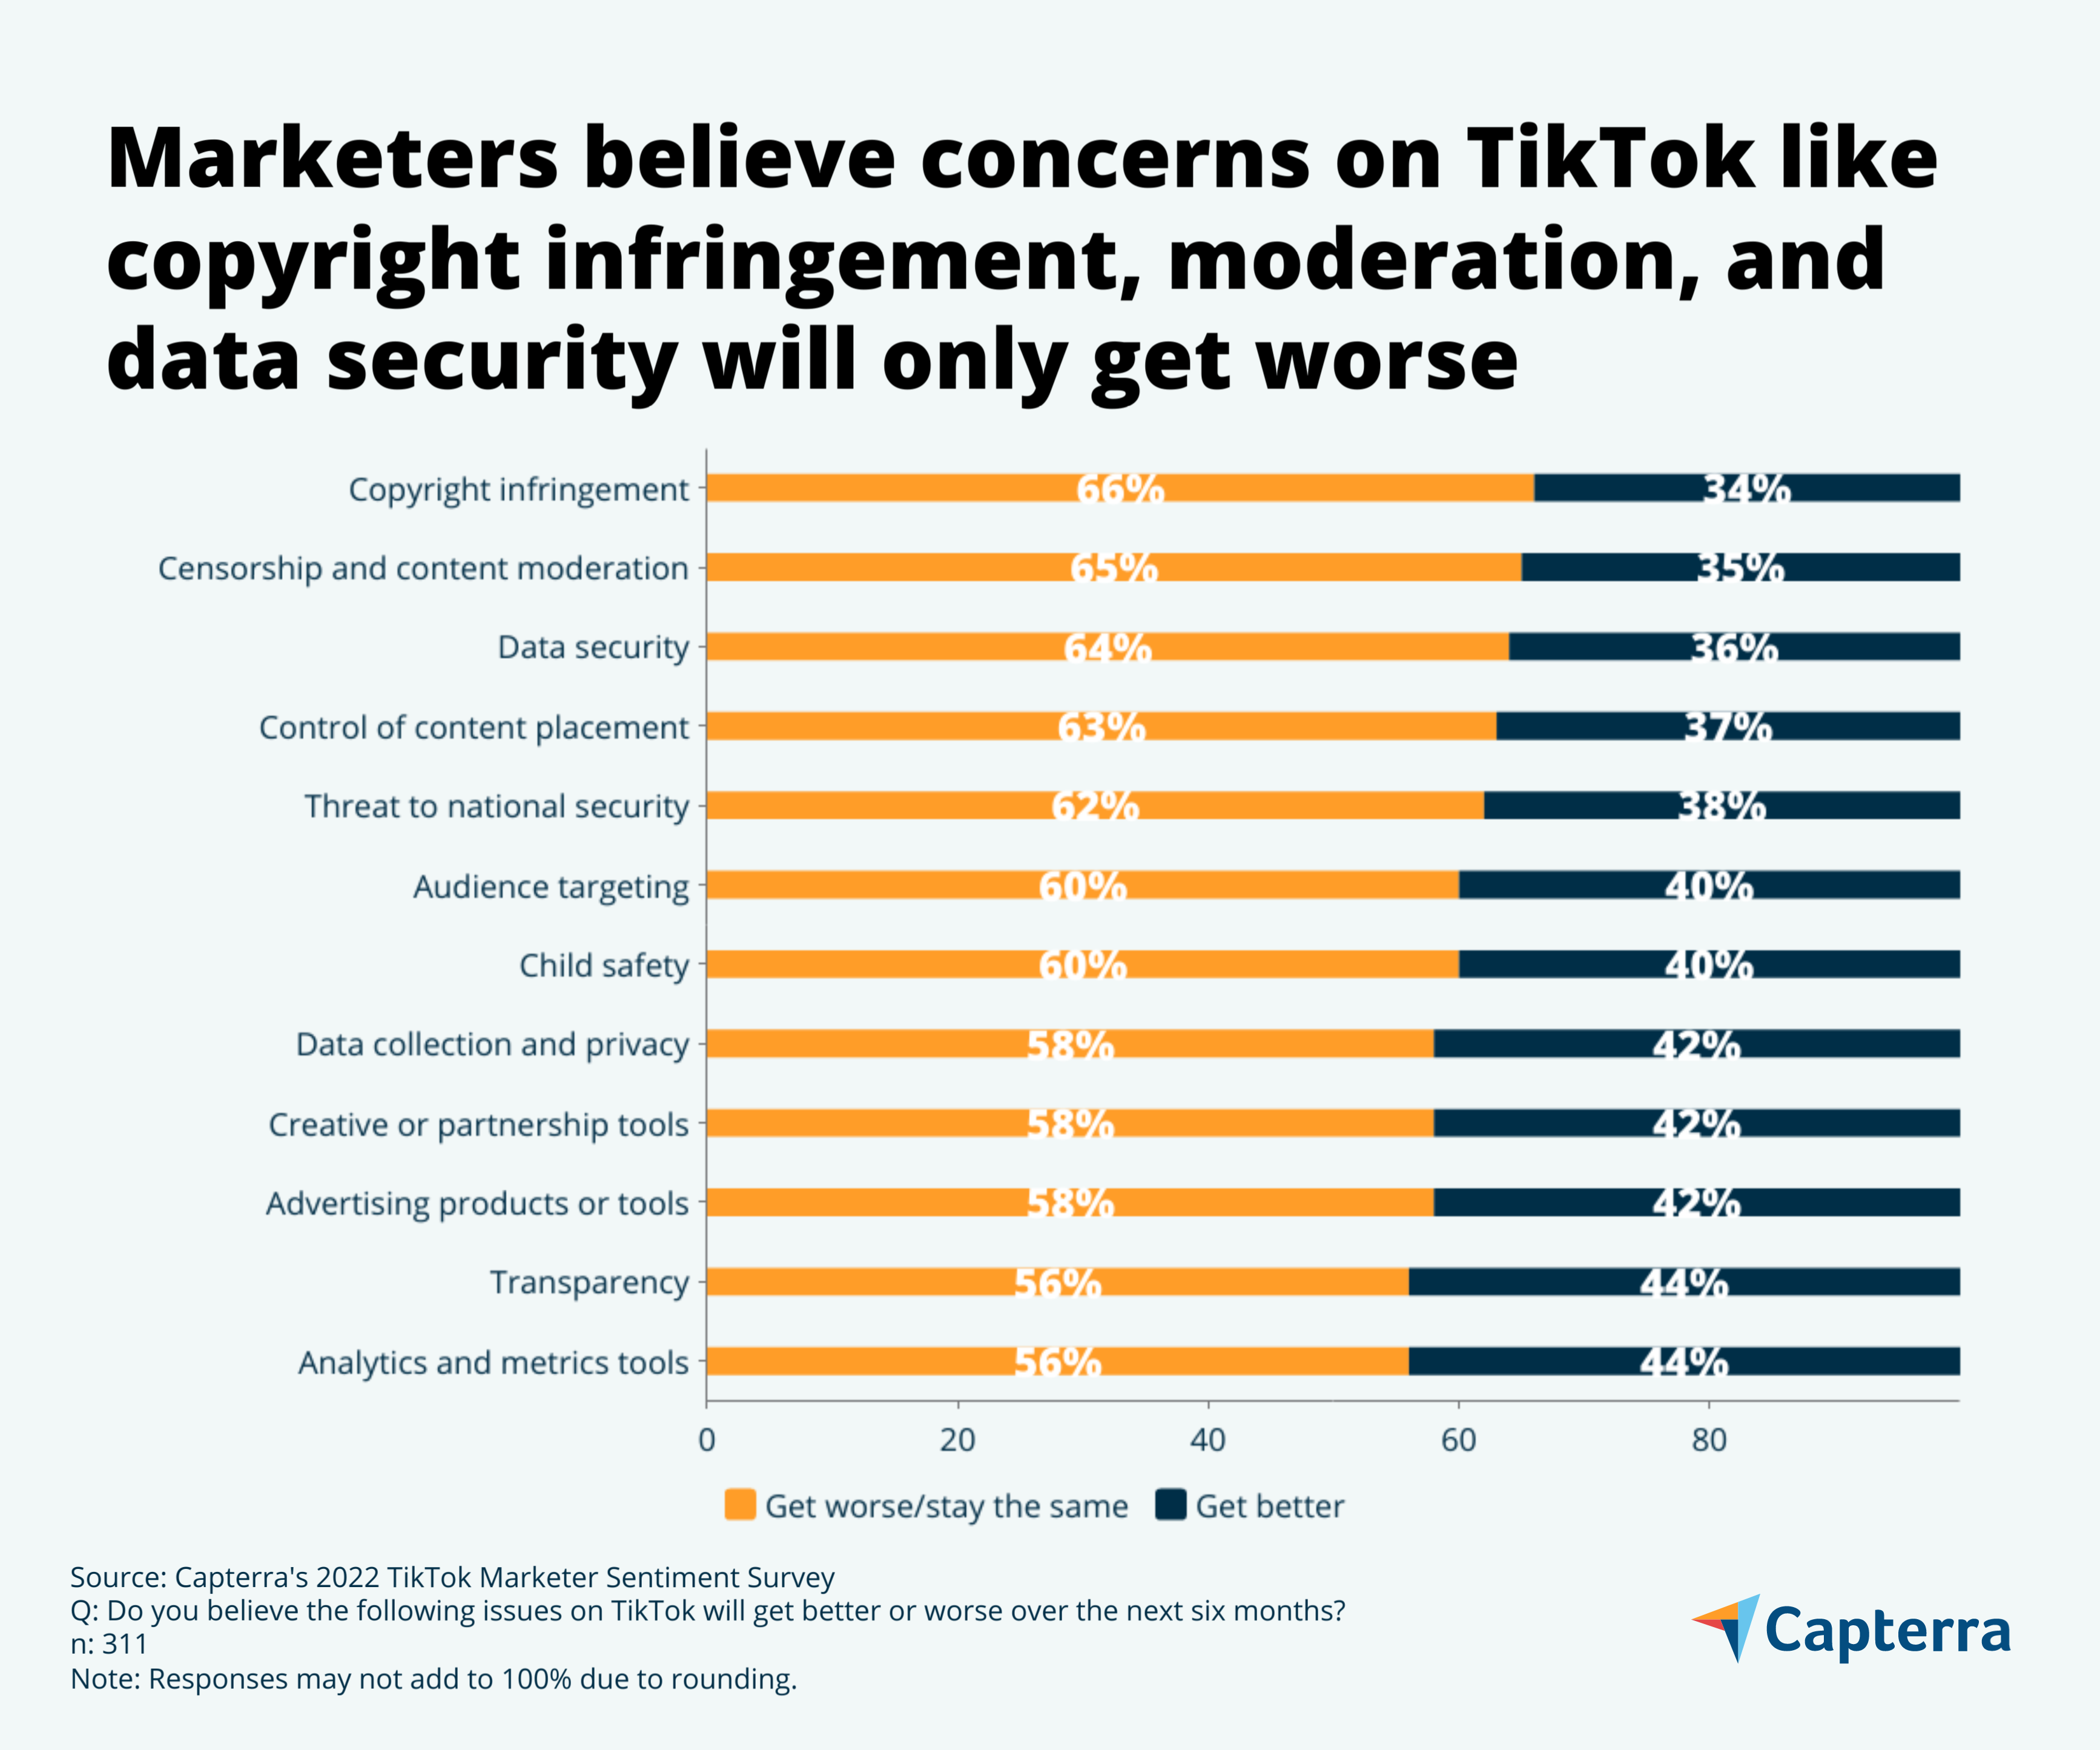 Marketers believe concerns on TikTok like copy infringement, moderation and data security will only get worse